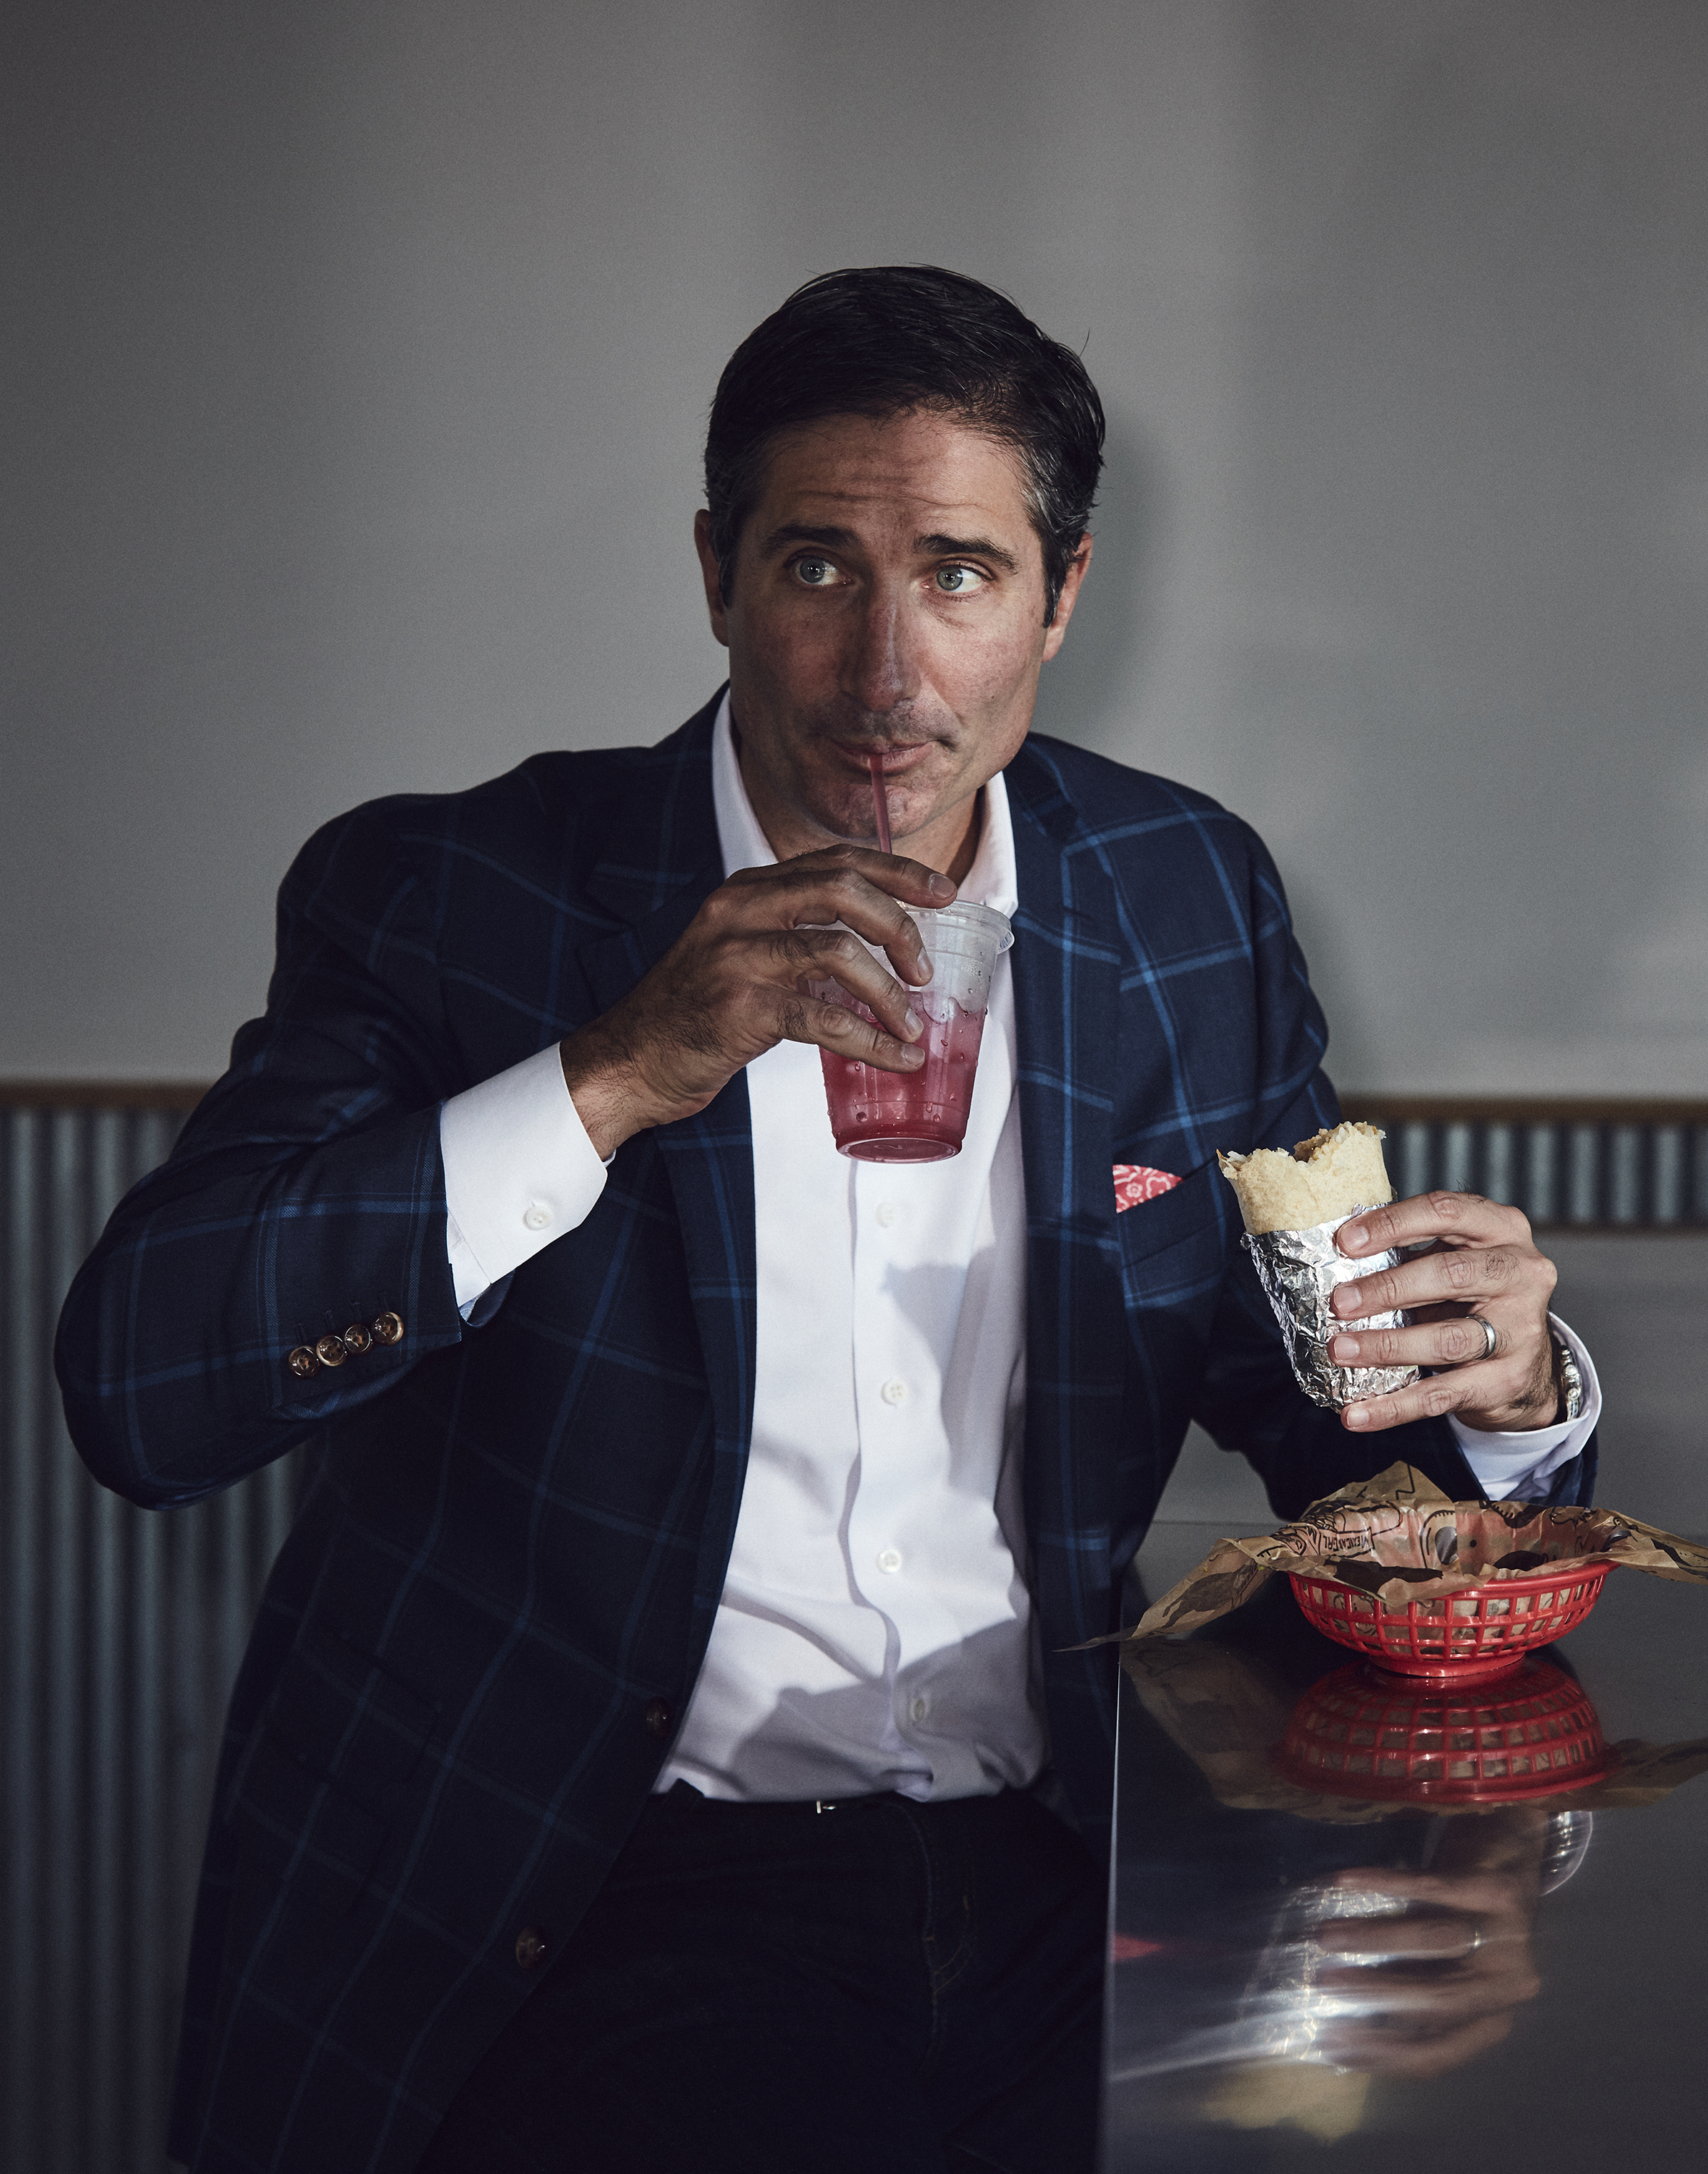 CEO Brian Niccol lunches at a Chipotle near the company’s new headquarters in Newport Beach, Calif. Niccol previously held the top post at Taco Bell. (Shaughn and John for TIME)